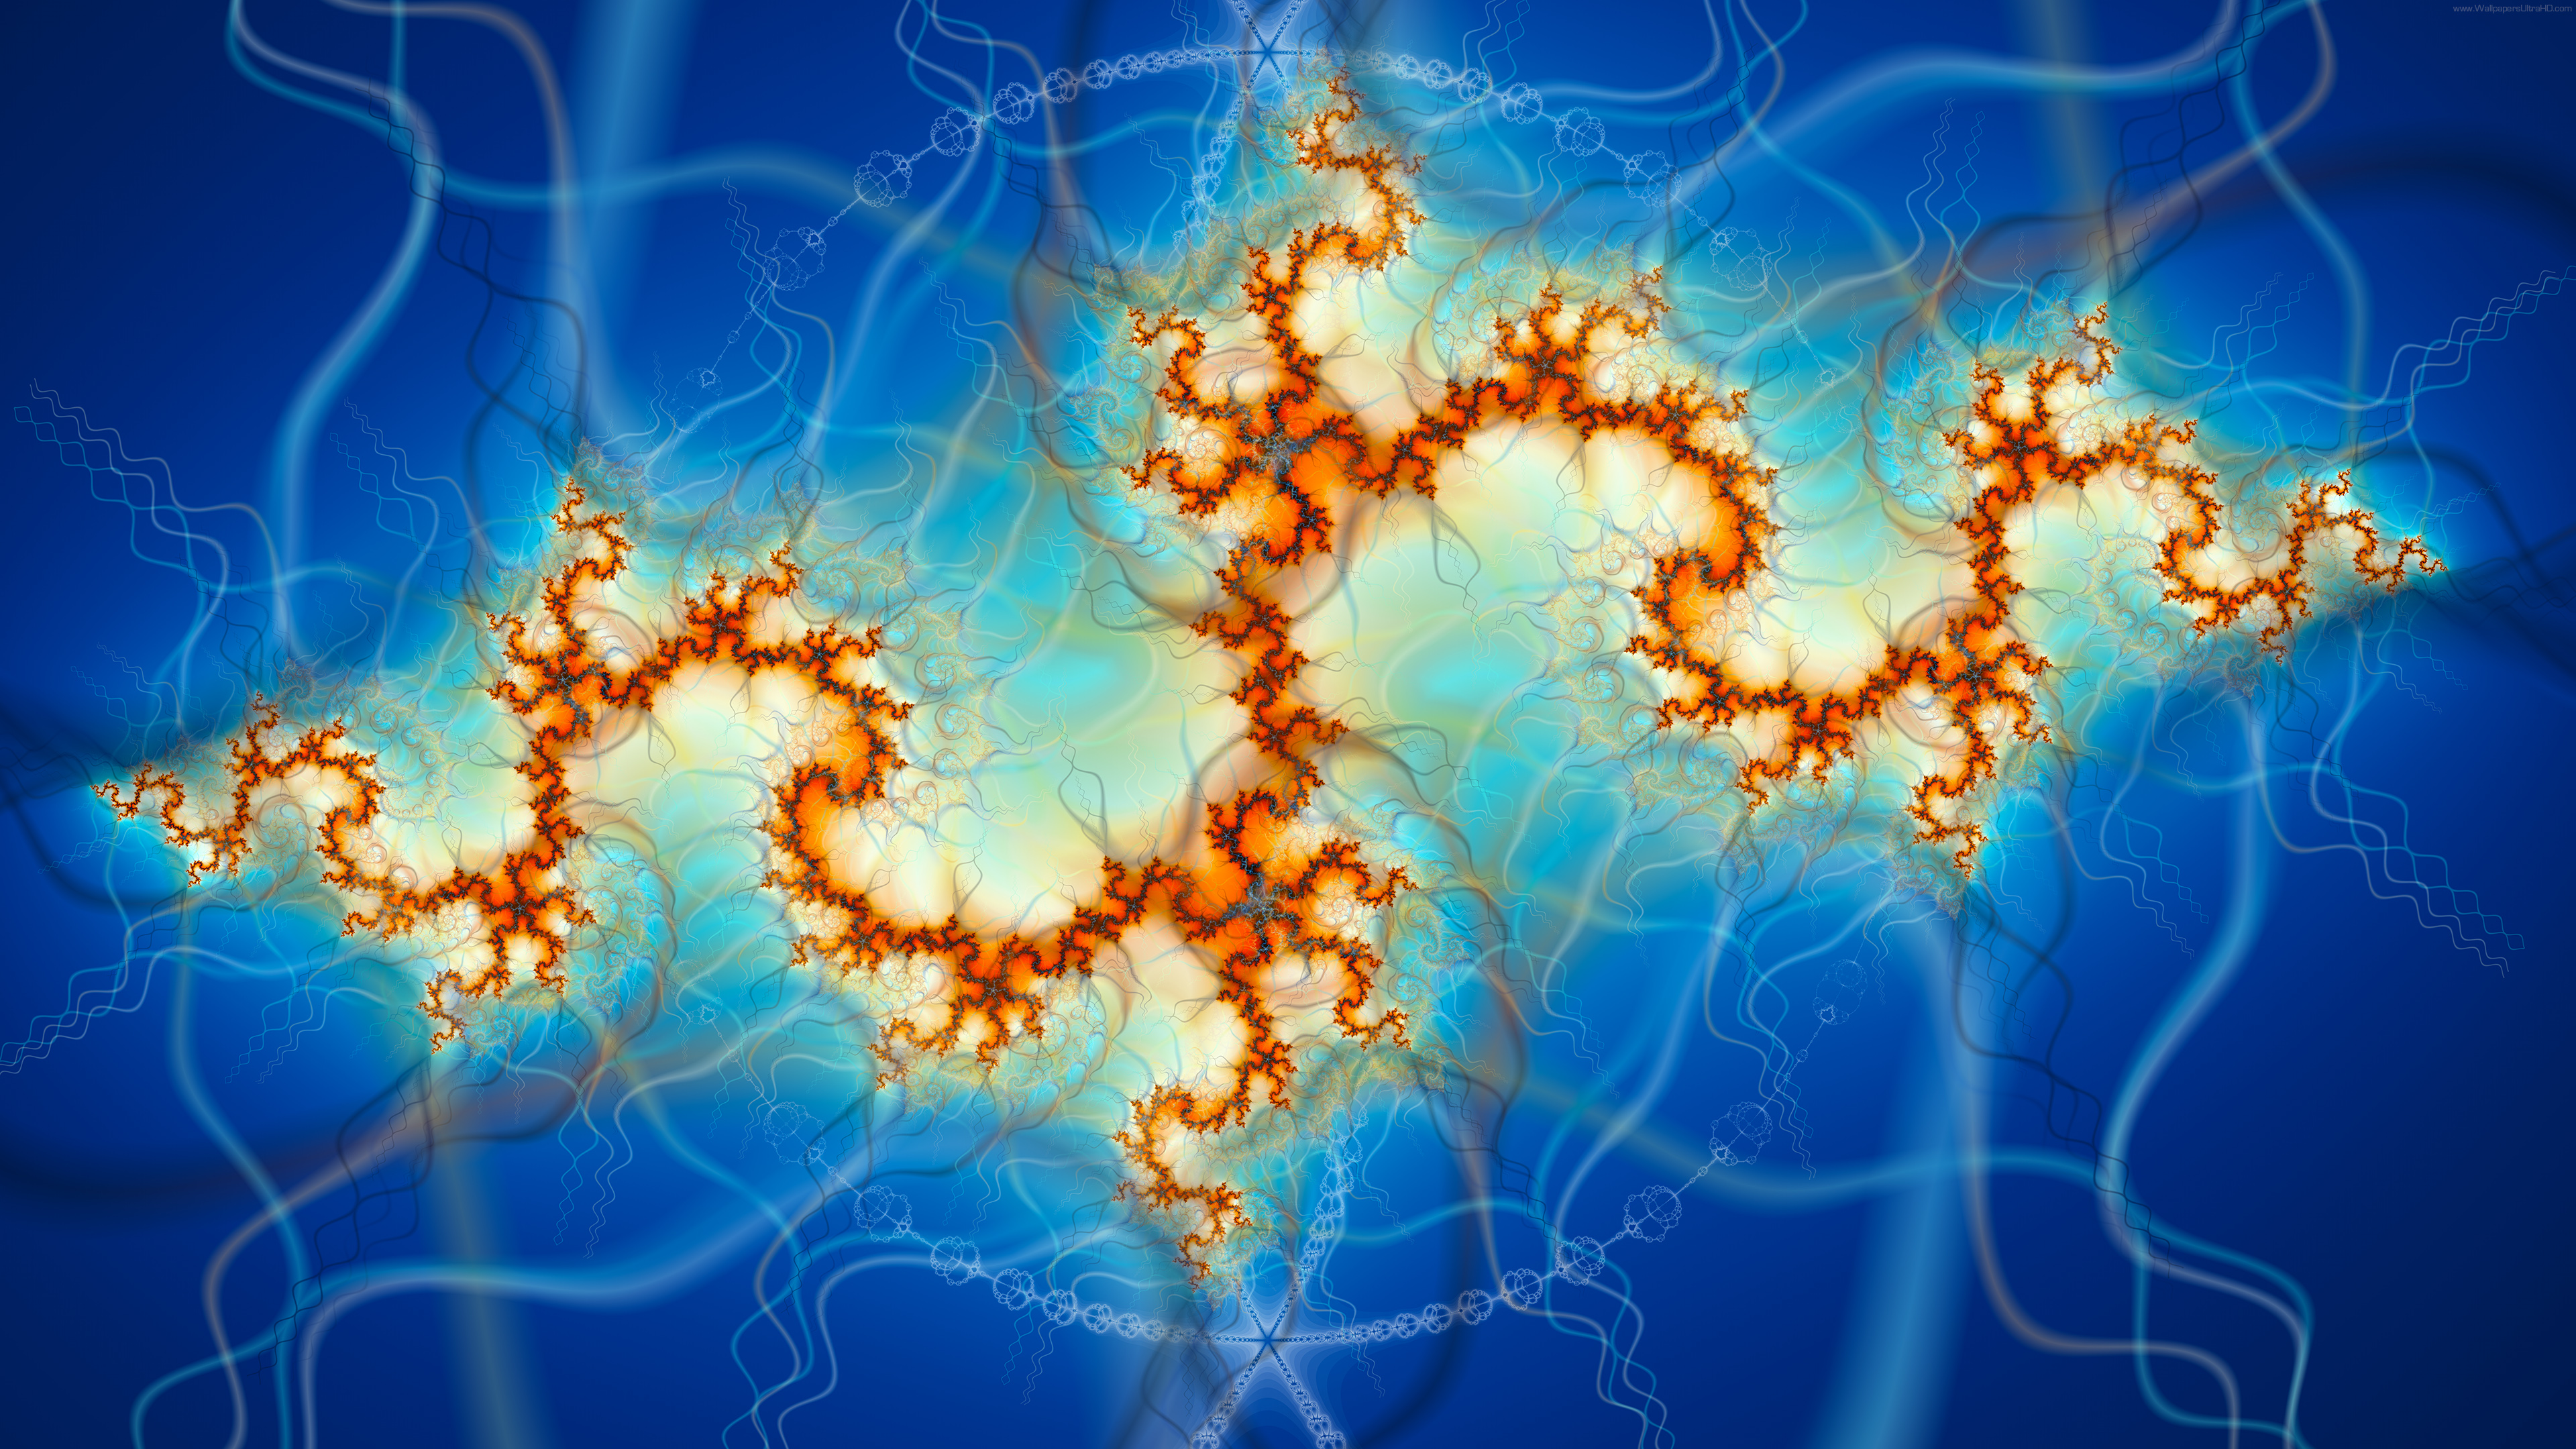 Ultra Hd Wallpapers 4k Fractal Art 3840x2160 Pictures